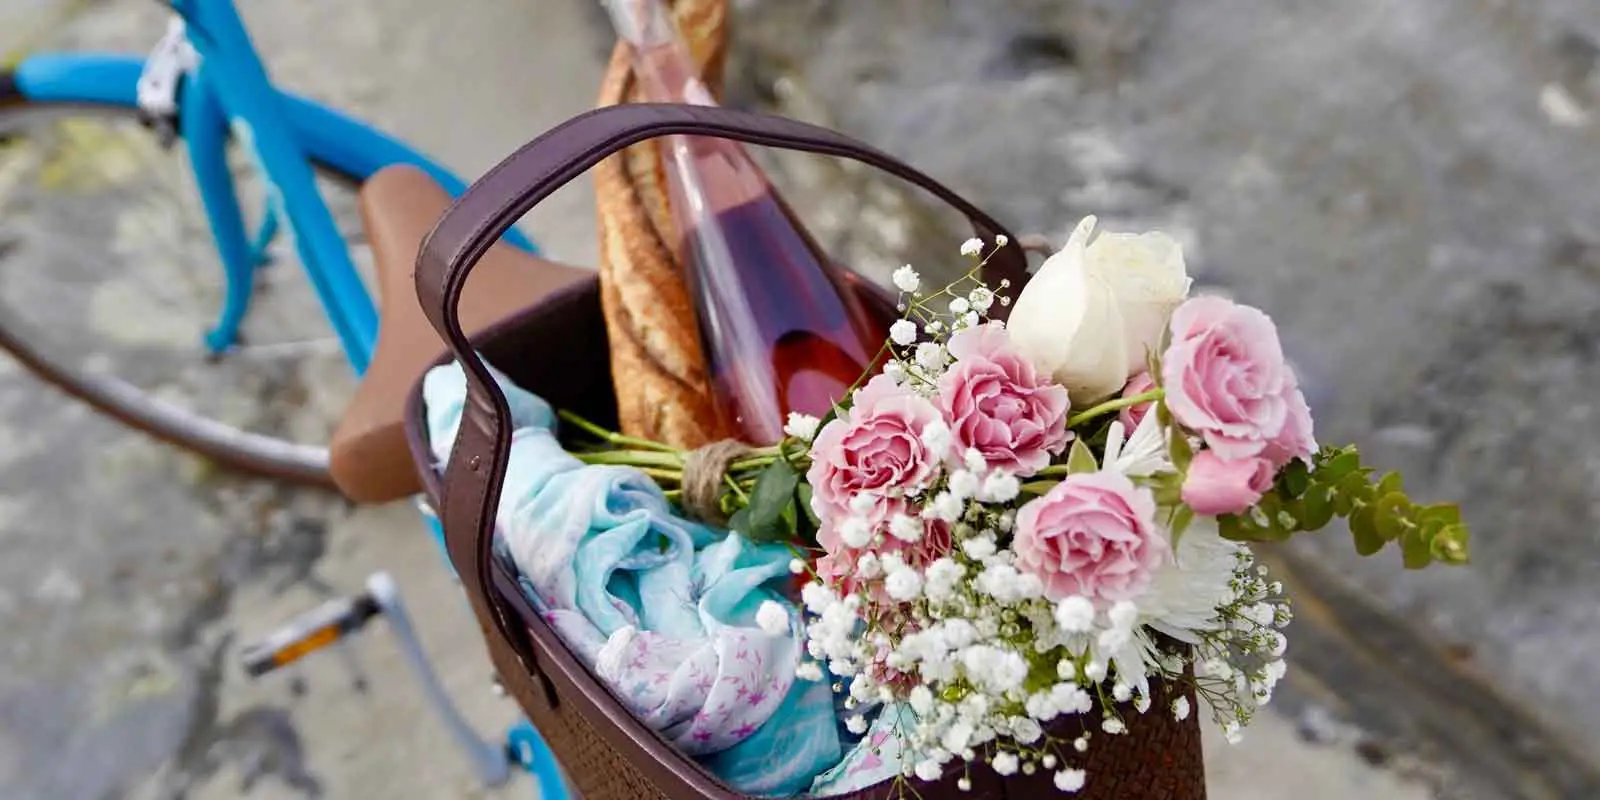 Close up of a basket on the back of a blue bicycle, filled with a baguette, bottle of pink wine, a blue and pink blanket or scarf, and a bouquet of pink carnations, white roses, and greenery.